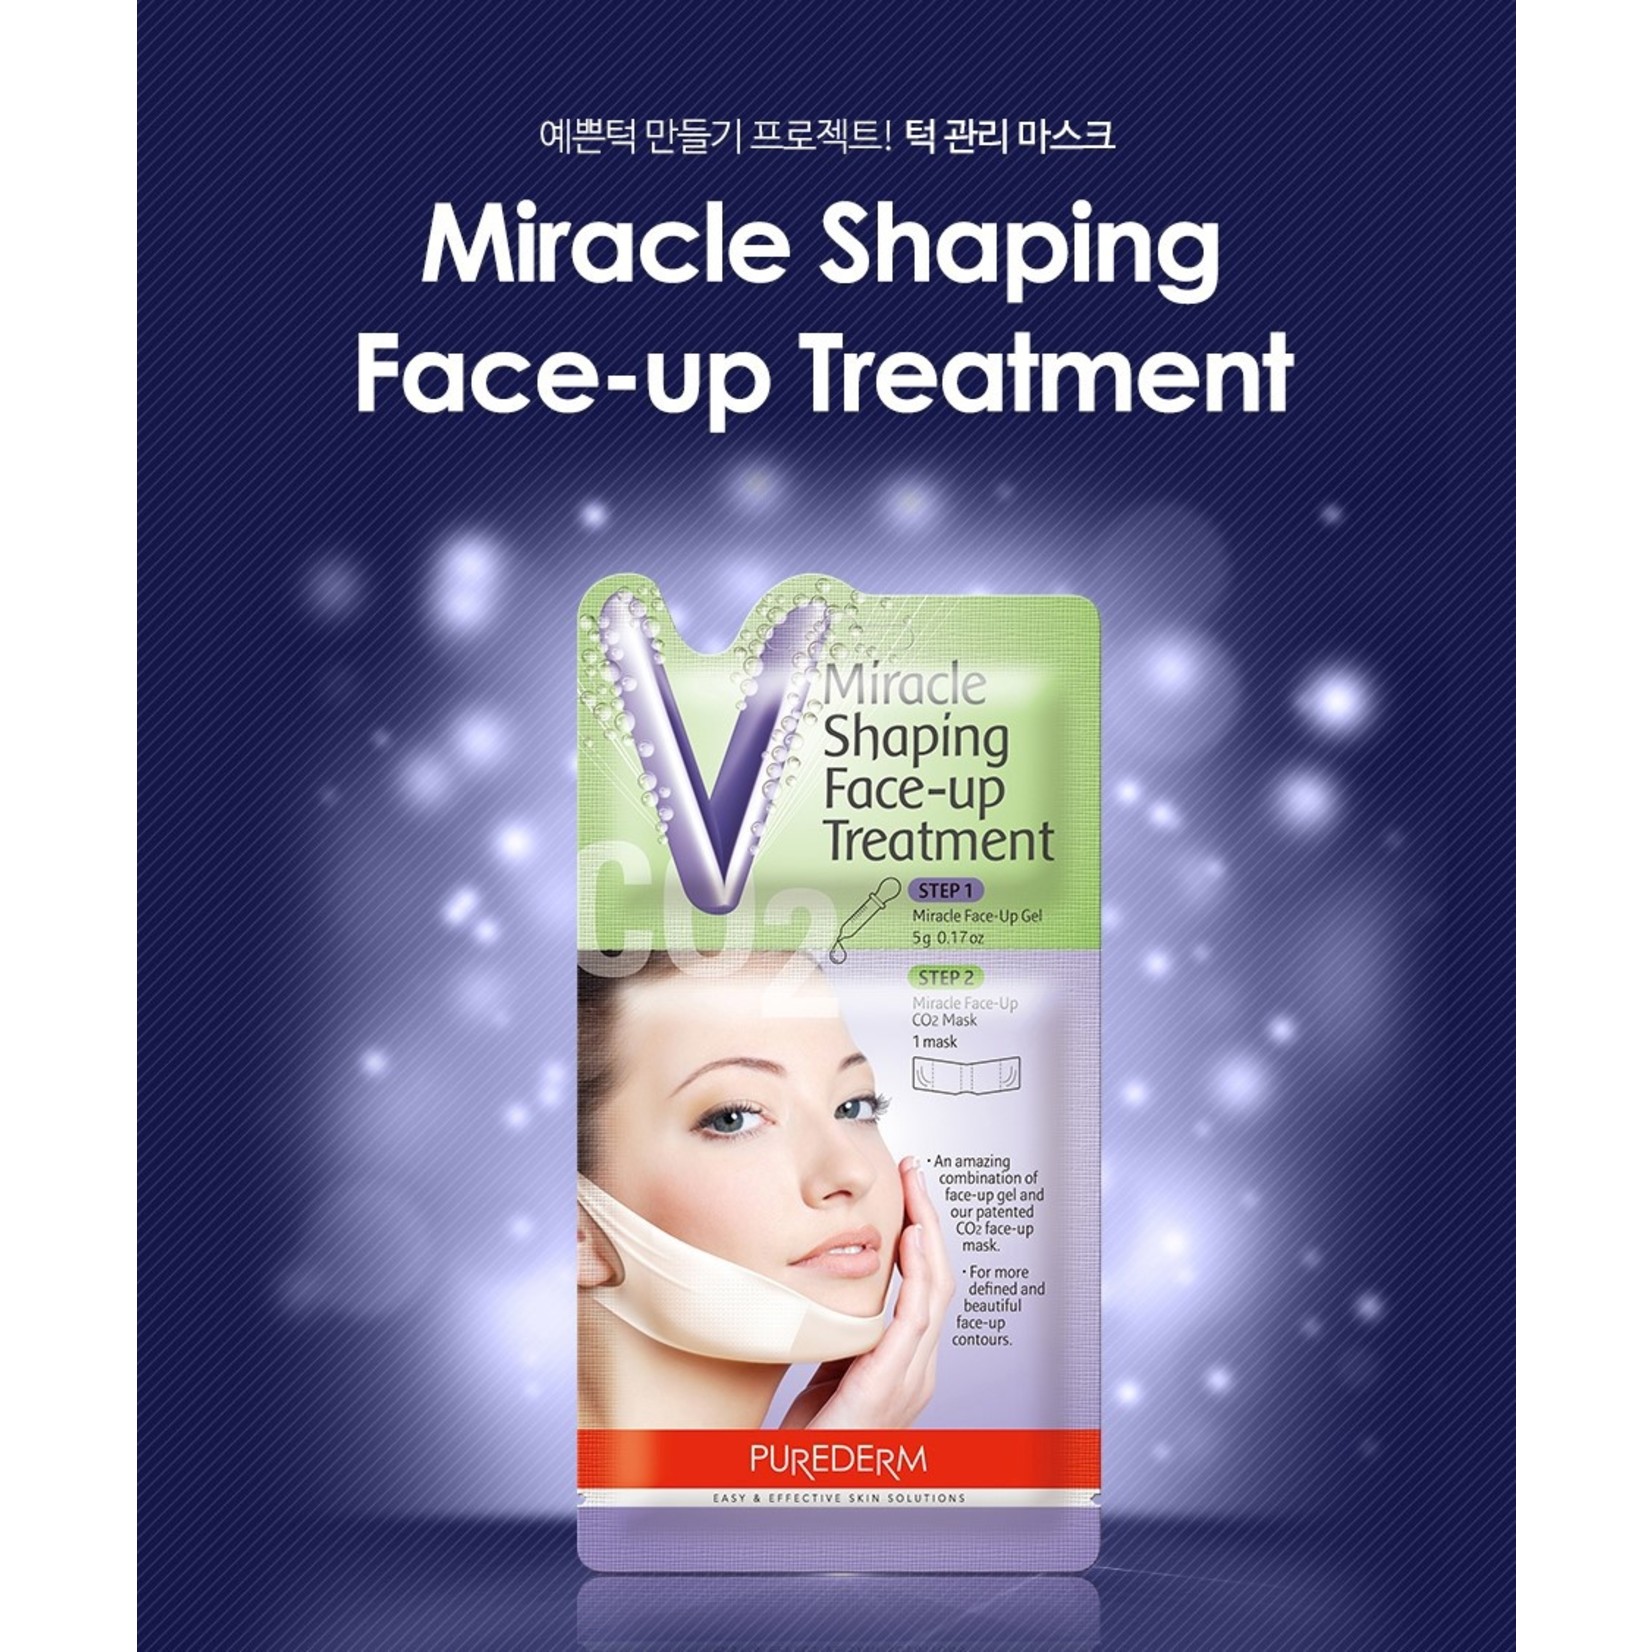 PUREDERM Miracle Shaping Face-Up Treatment